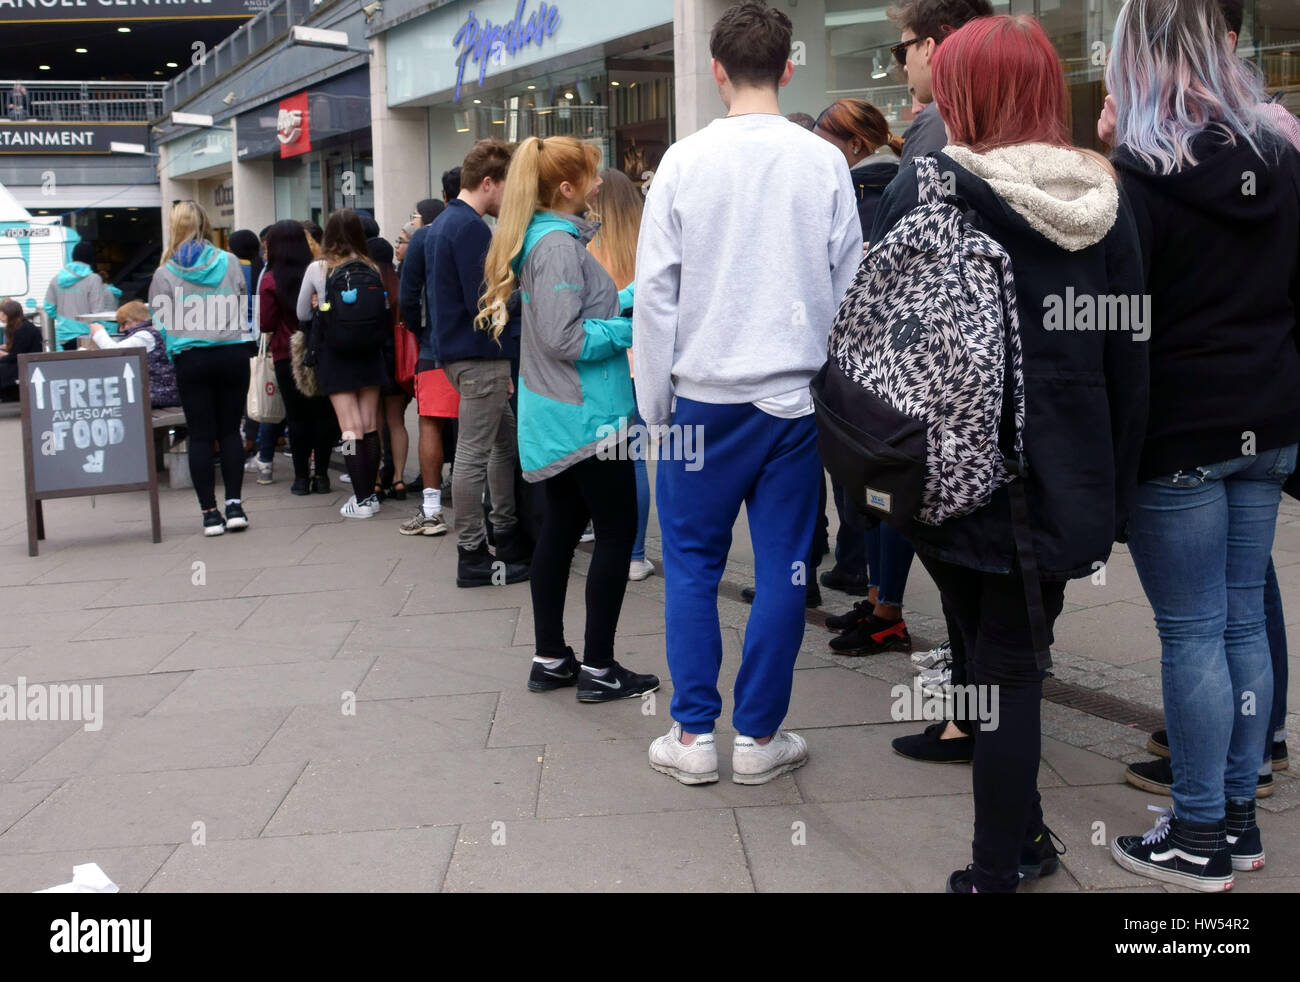 People queue for free food in Deliveroo promotion in North London shopping centre Stock Photo